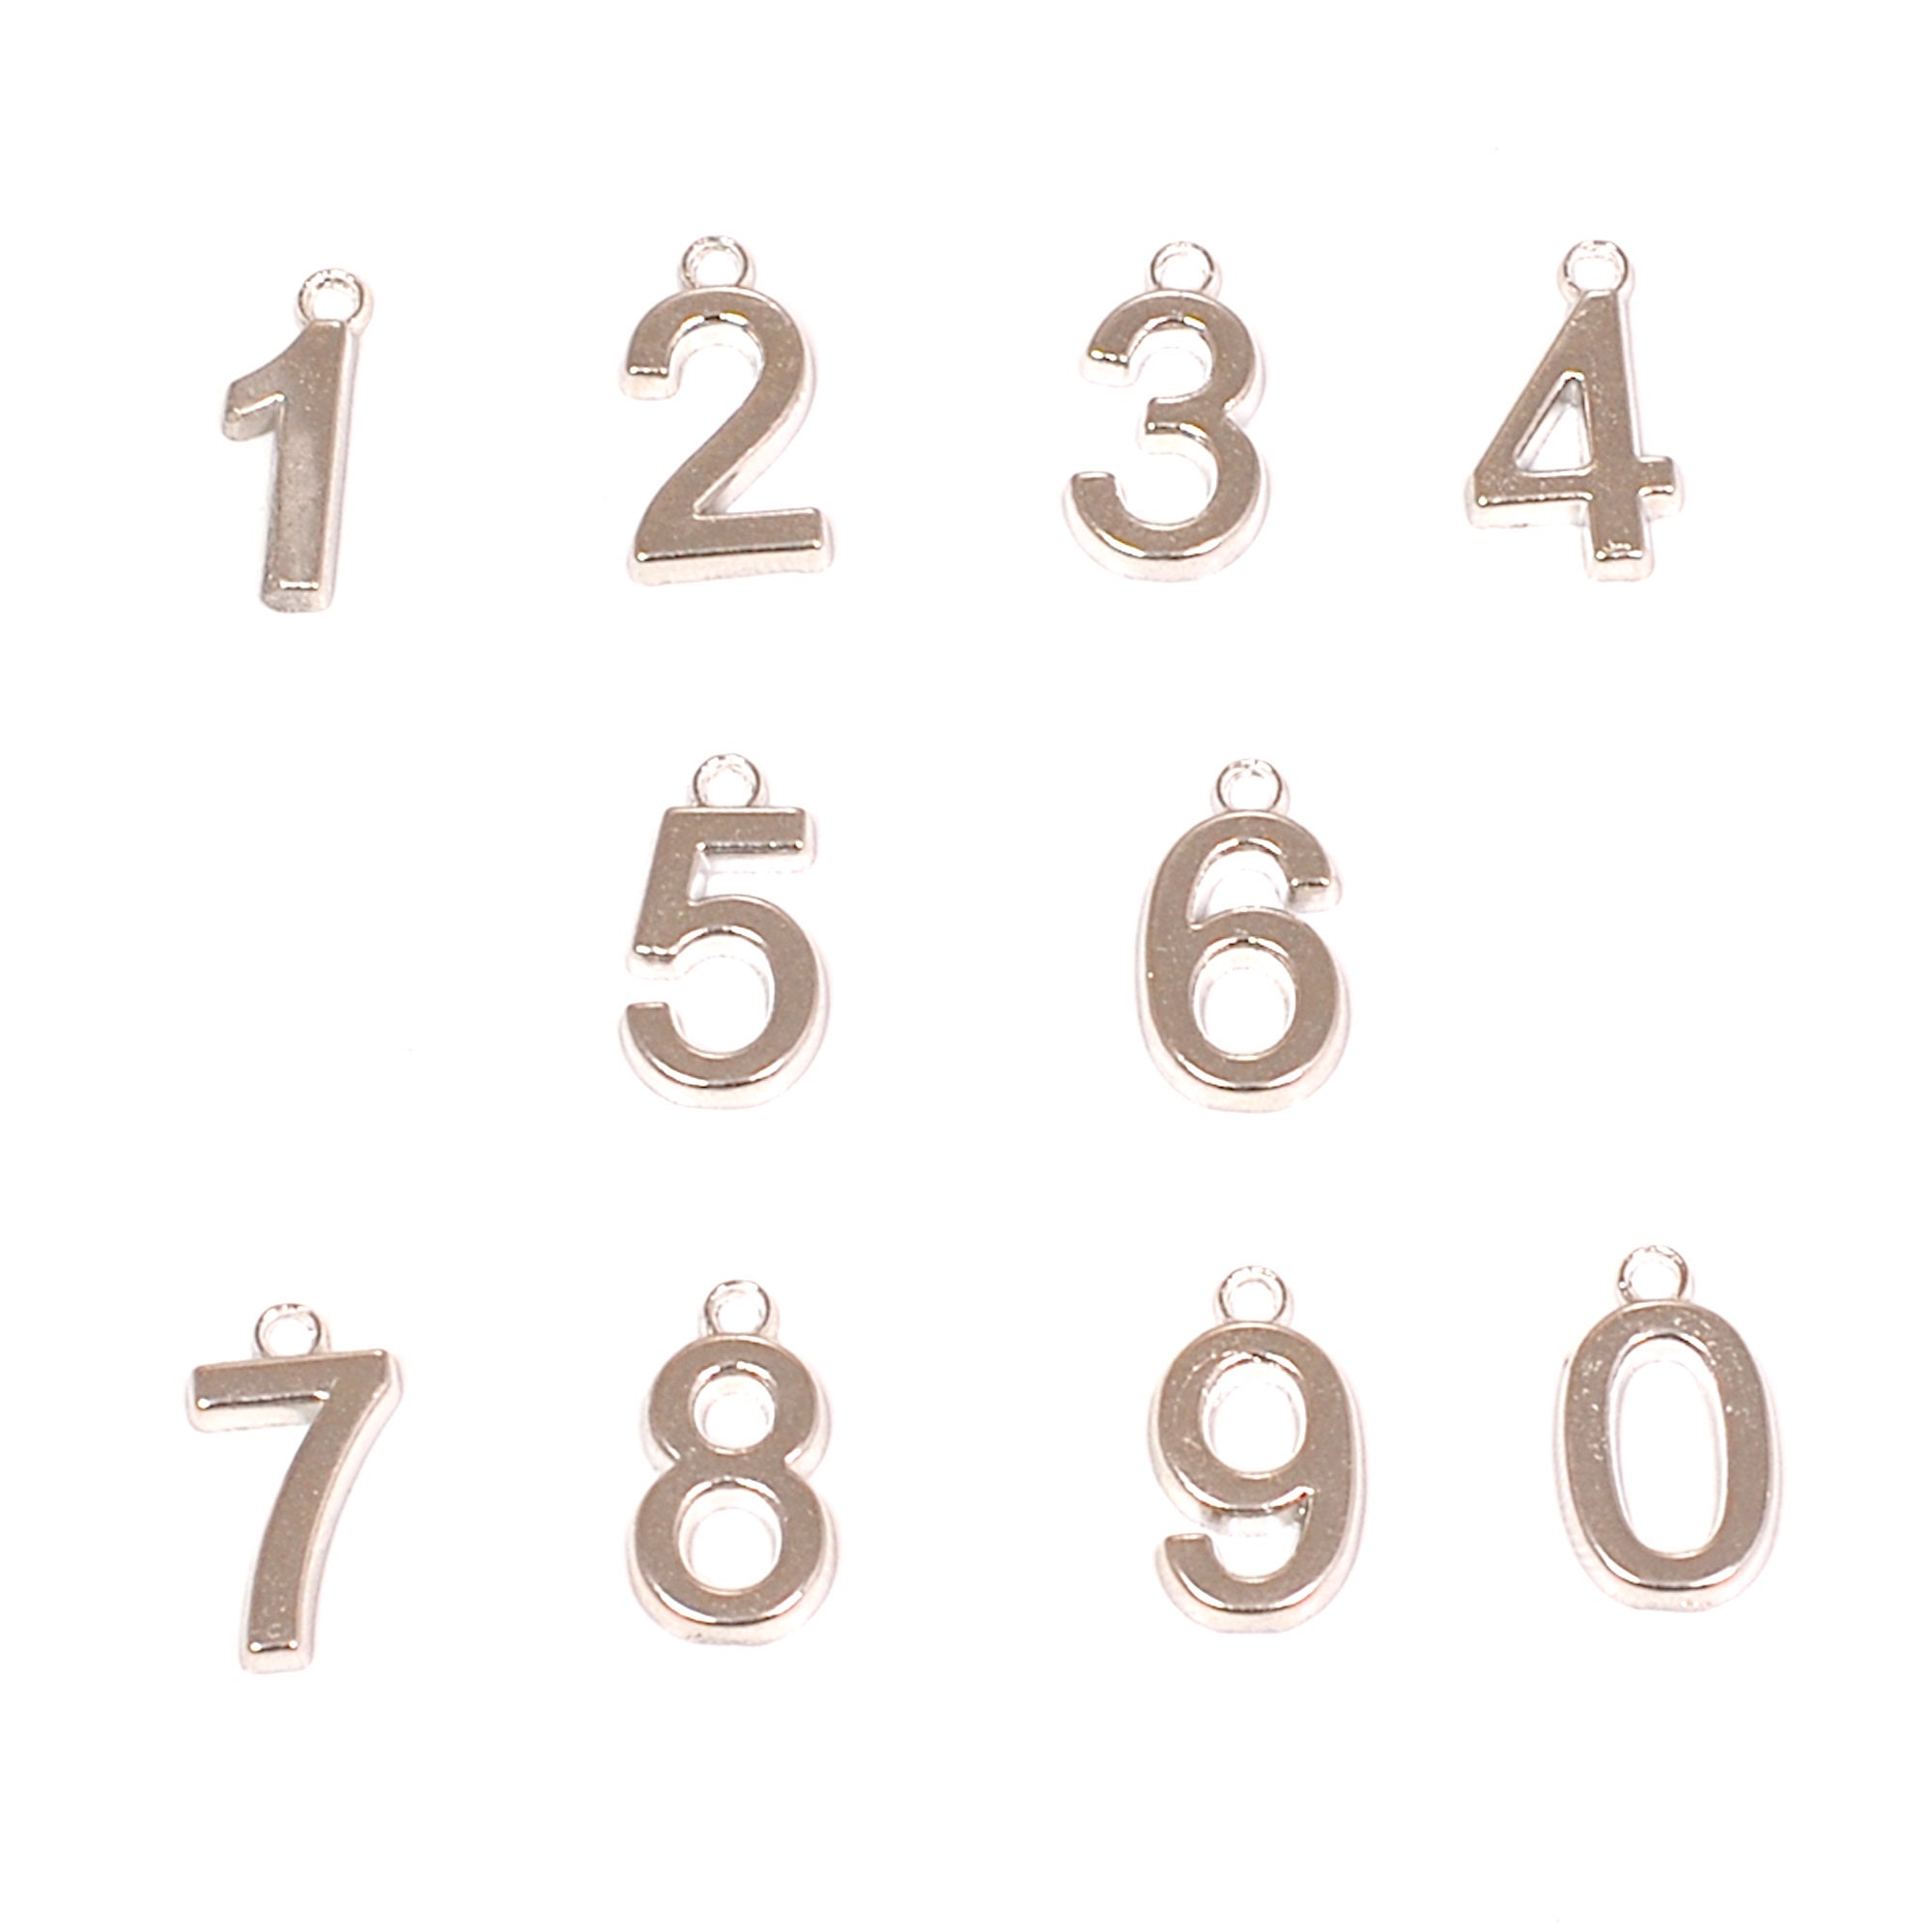 Number Charms 0 to 9 Charm (10pcs) (15mm / Tibetan Silver) Metal Findings  Pendant Bracelet Earrings Zipper Pulls Bookmark Keychains CHM249